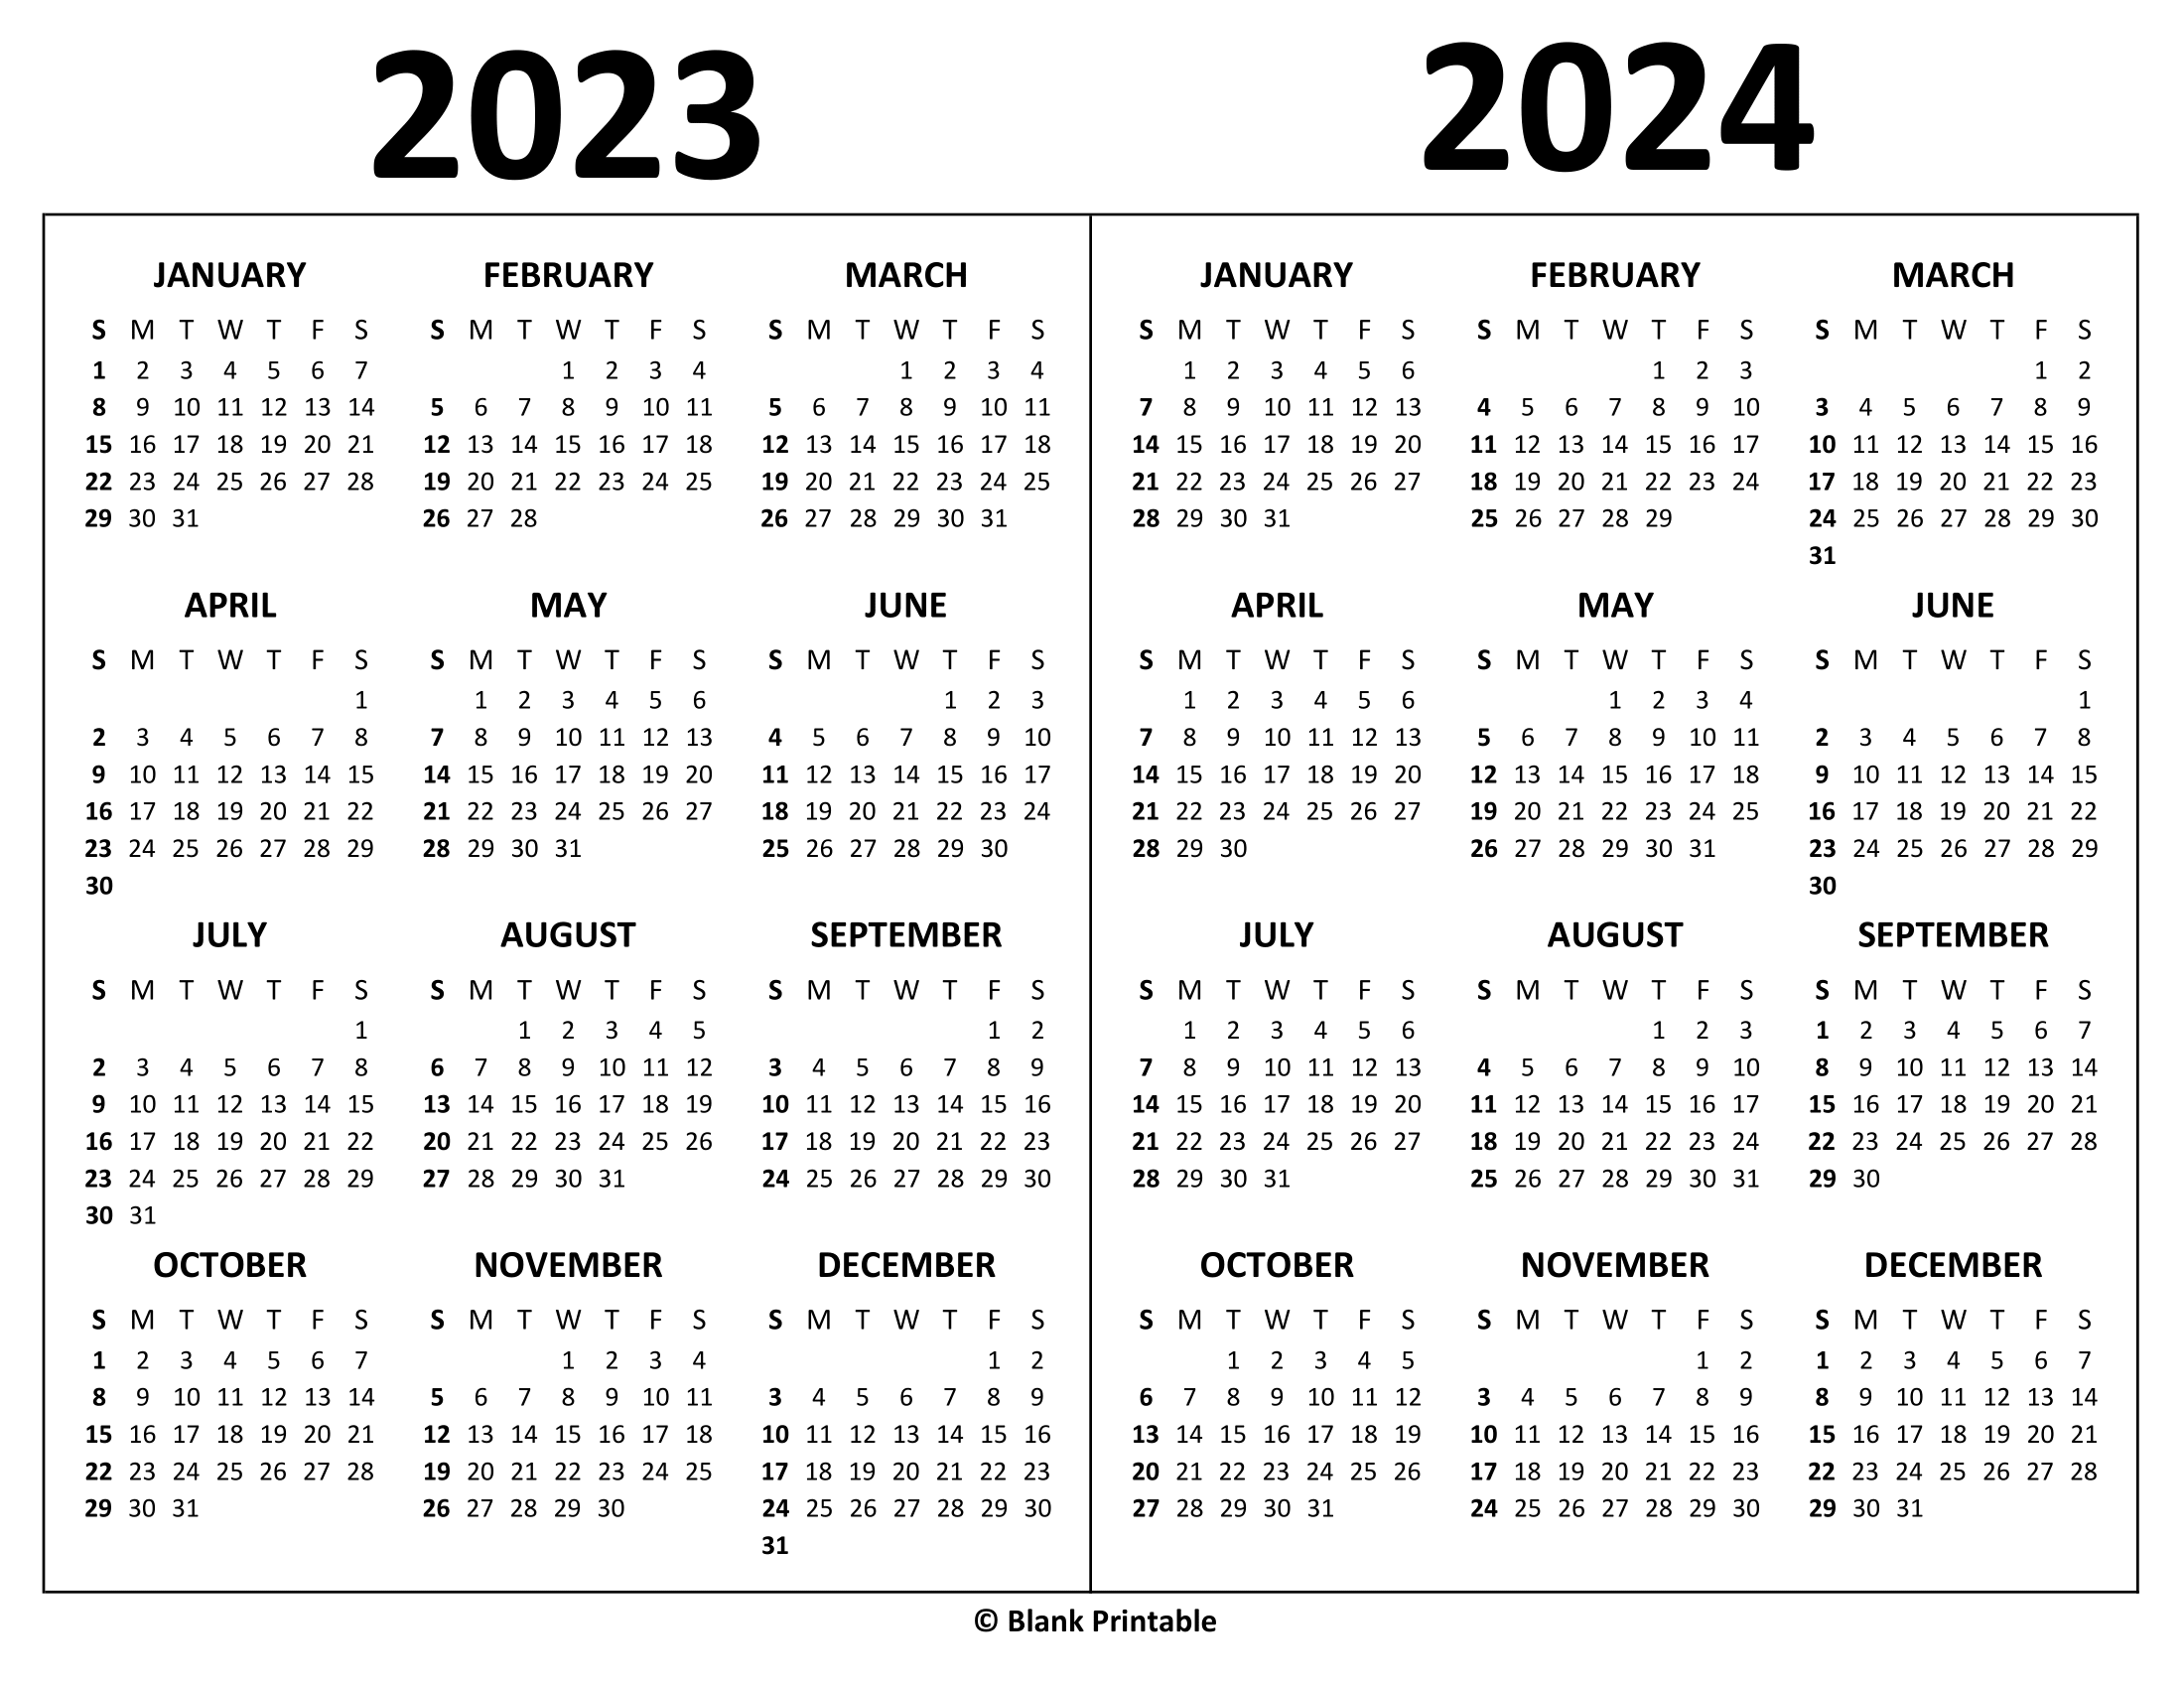 2023 2024 Calendar Printable One Page | Two Year Calendar Planner for Free Printable Calendar 2023 And 2024